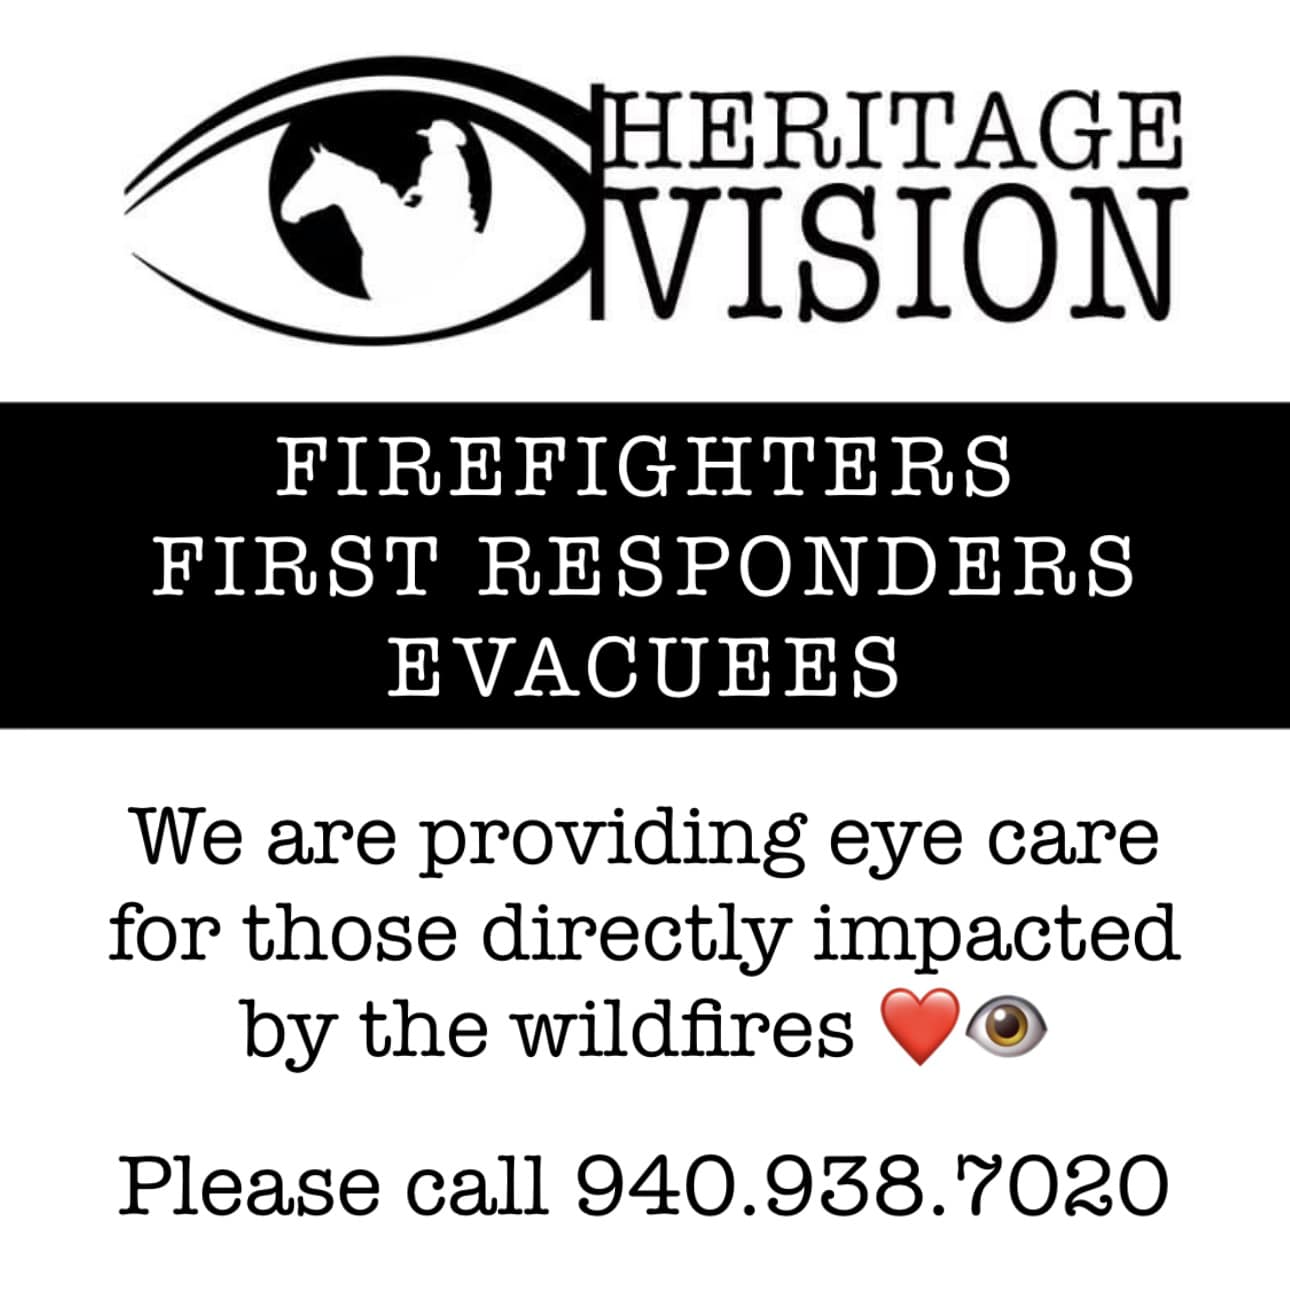 Heritage Vision 1910 Ave I NW, Childress Texas 79201